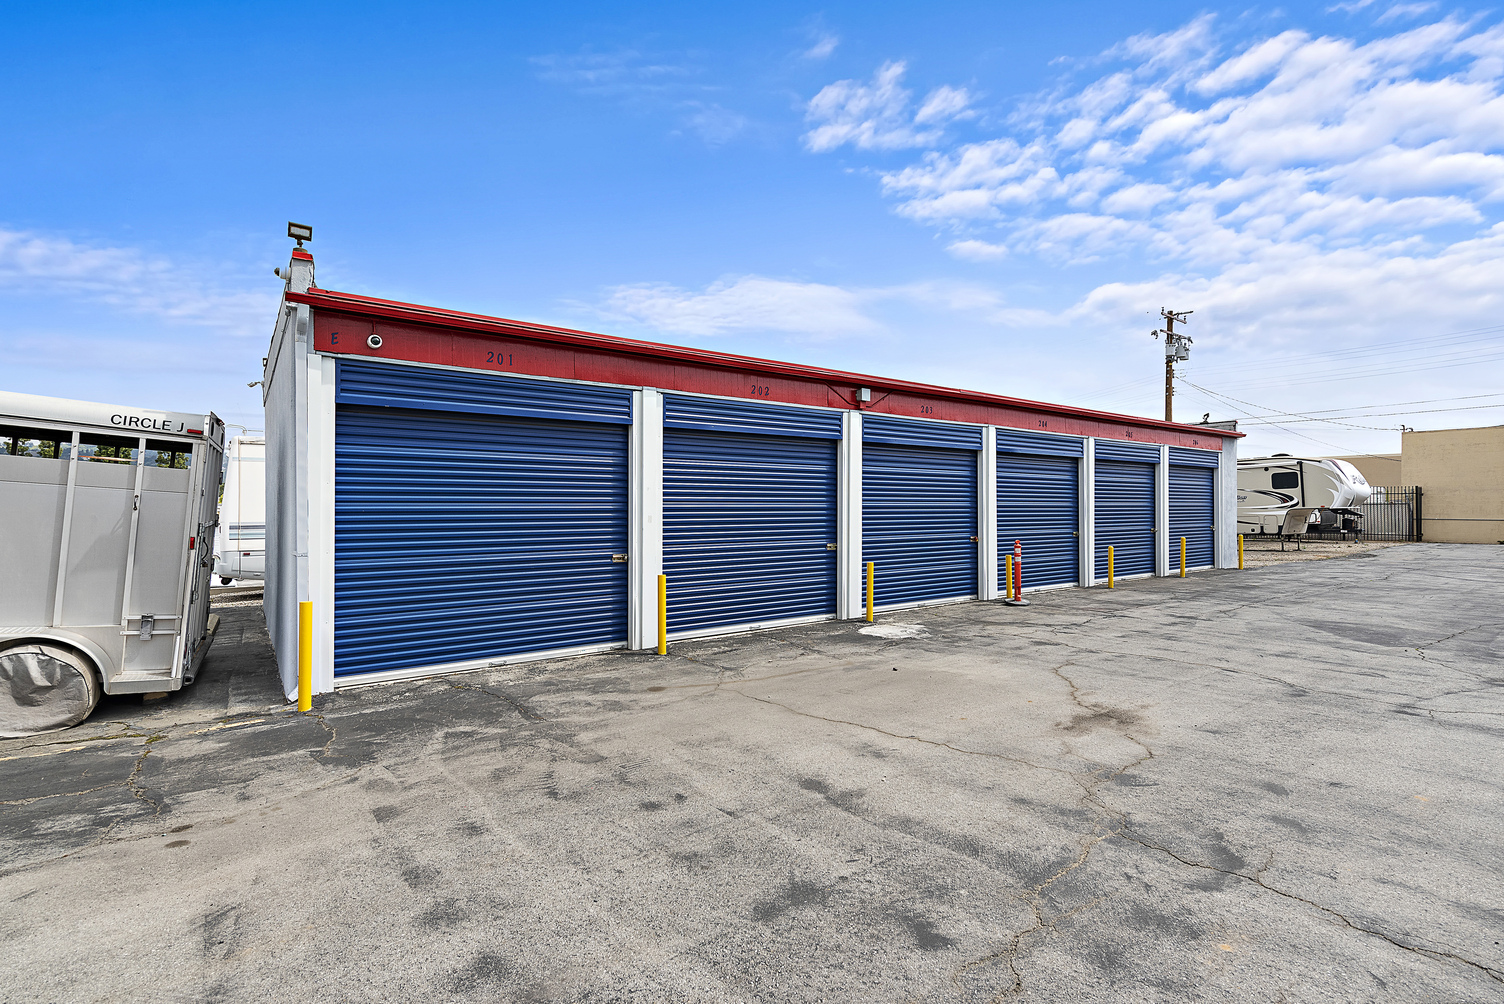 An exterior view of the Lamber RV & Self Storage units and their entry doors.